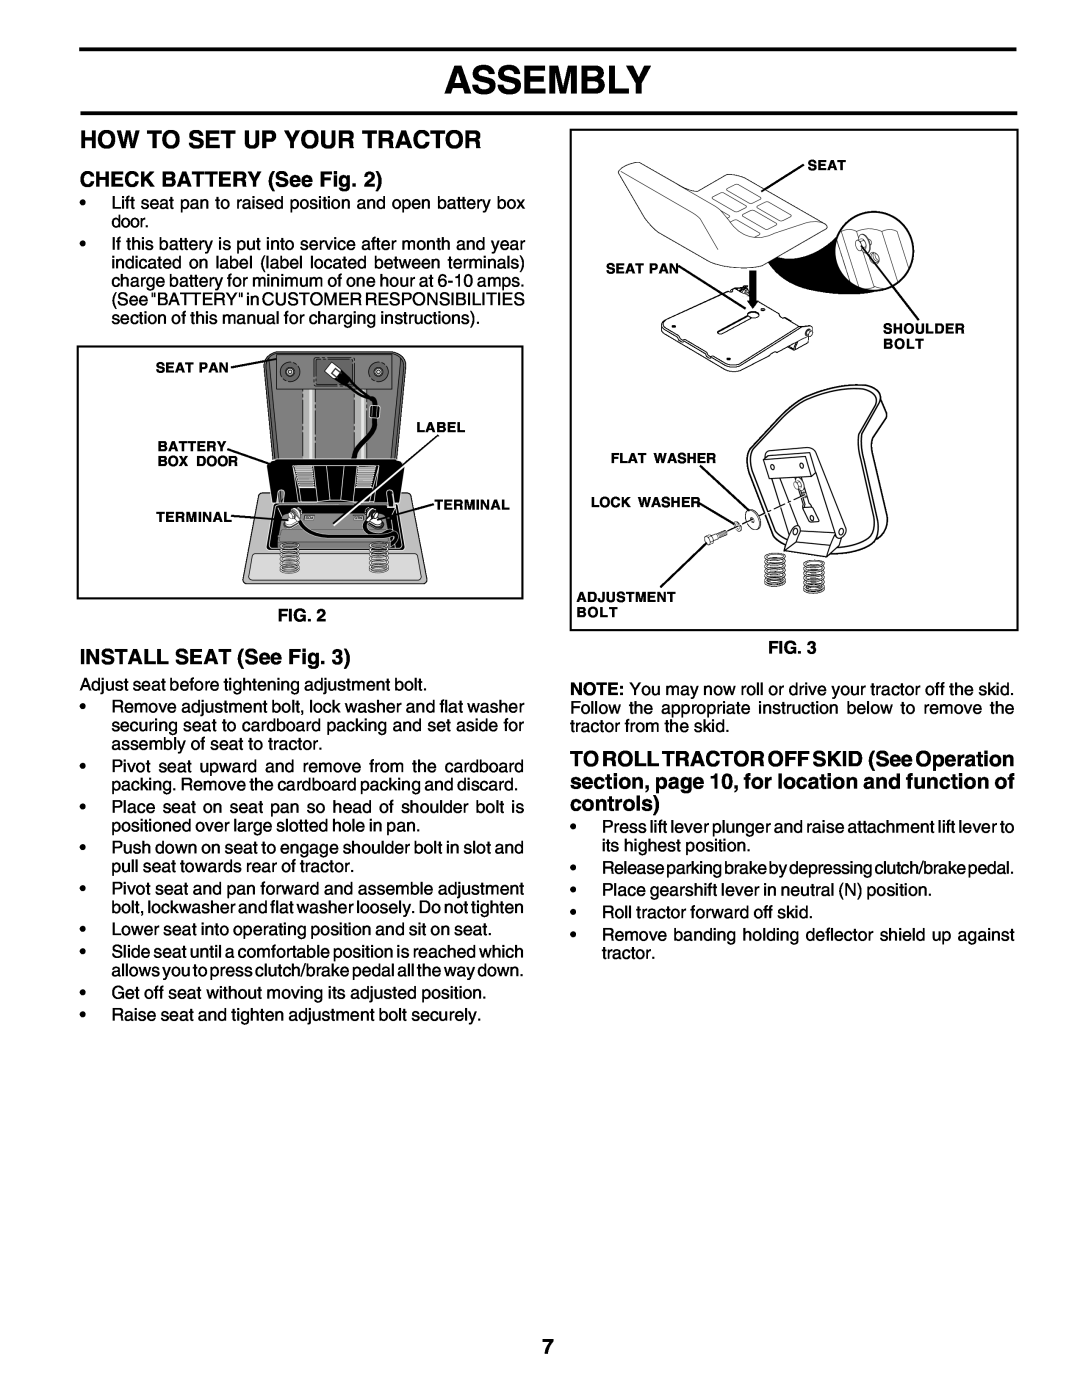 Weed Eater 180530 manual How To Set Up Your Tractor, Assembly, CHECK BATTERY See Fig, INSTALL SEAT See Fig 